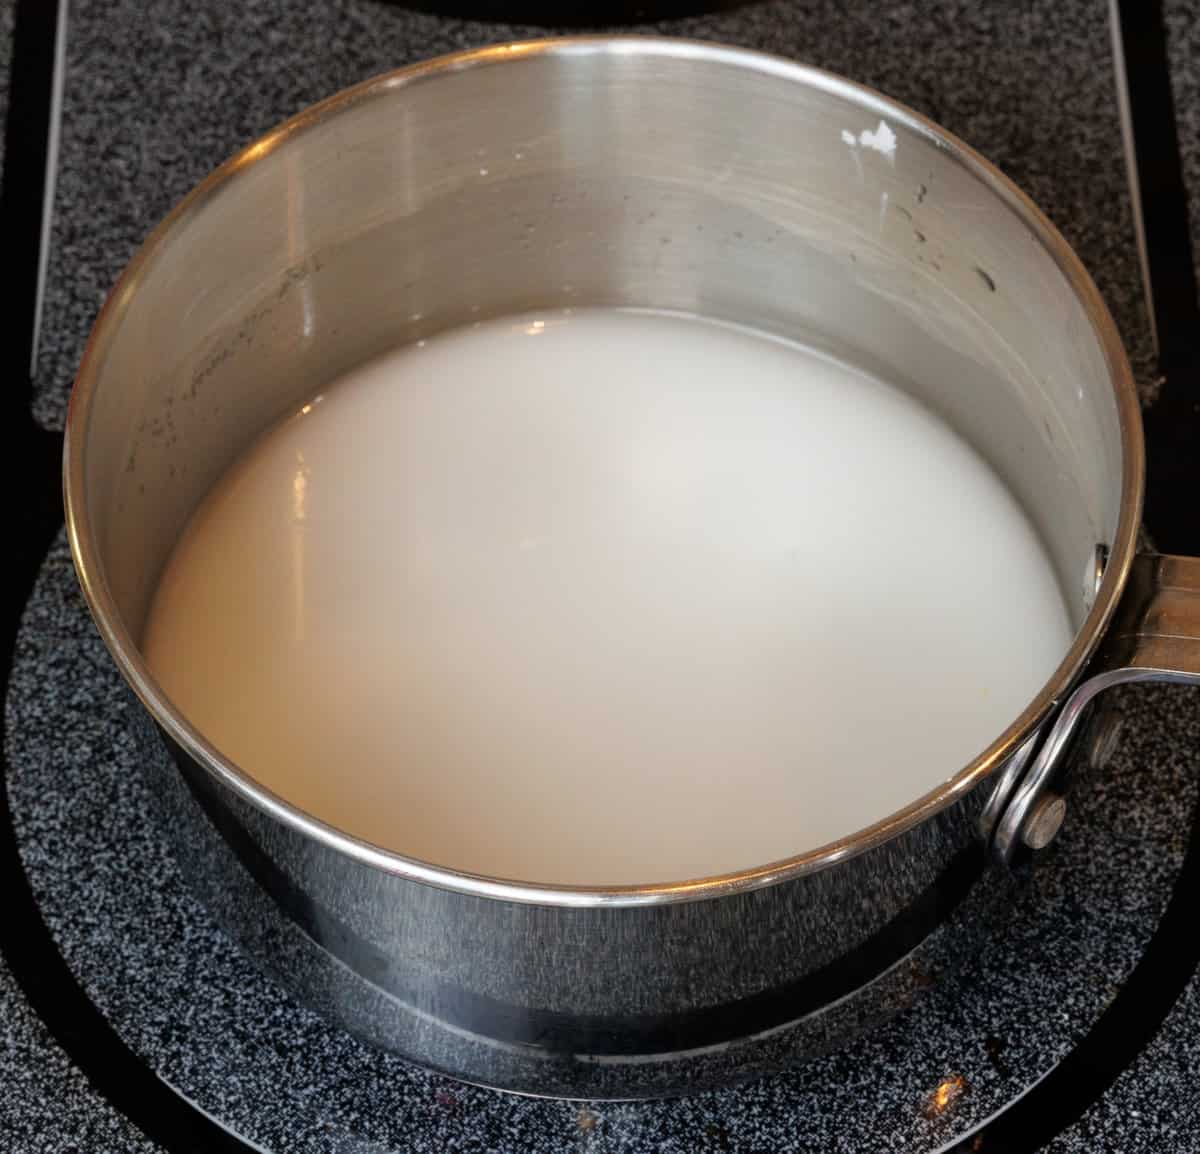 cornstarch and water simmering in a small saucepan